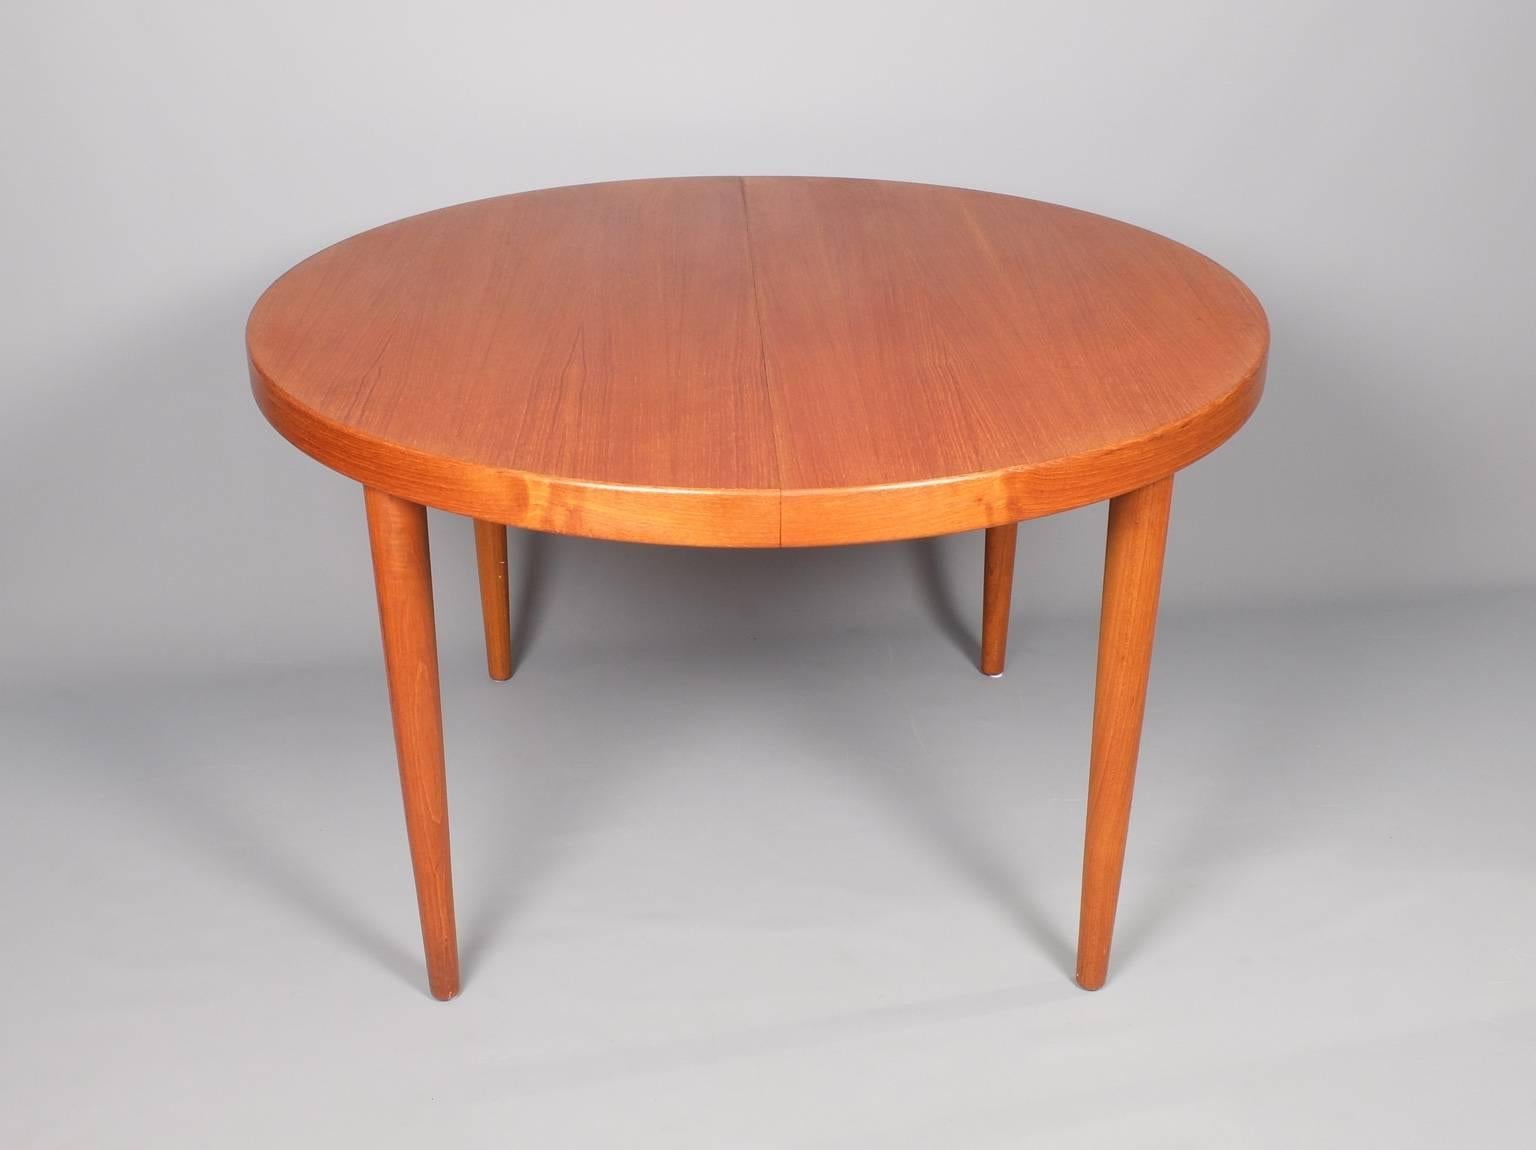 A teak dining table designed by Kai Kristiansen that features two inserts giving the option of three different lengths. As can be seen from the photos one of the leaves has the same rim as the fixed part of the table while the other does not and is